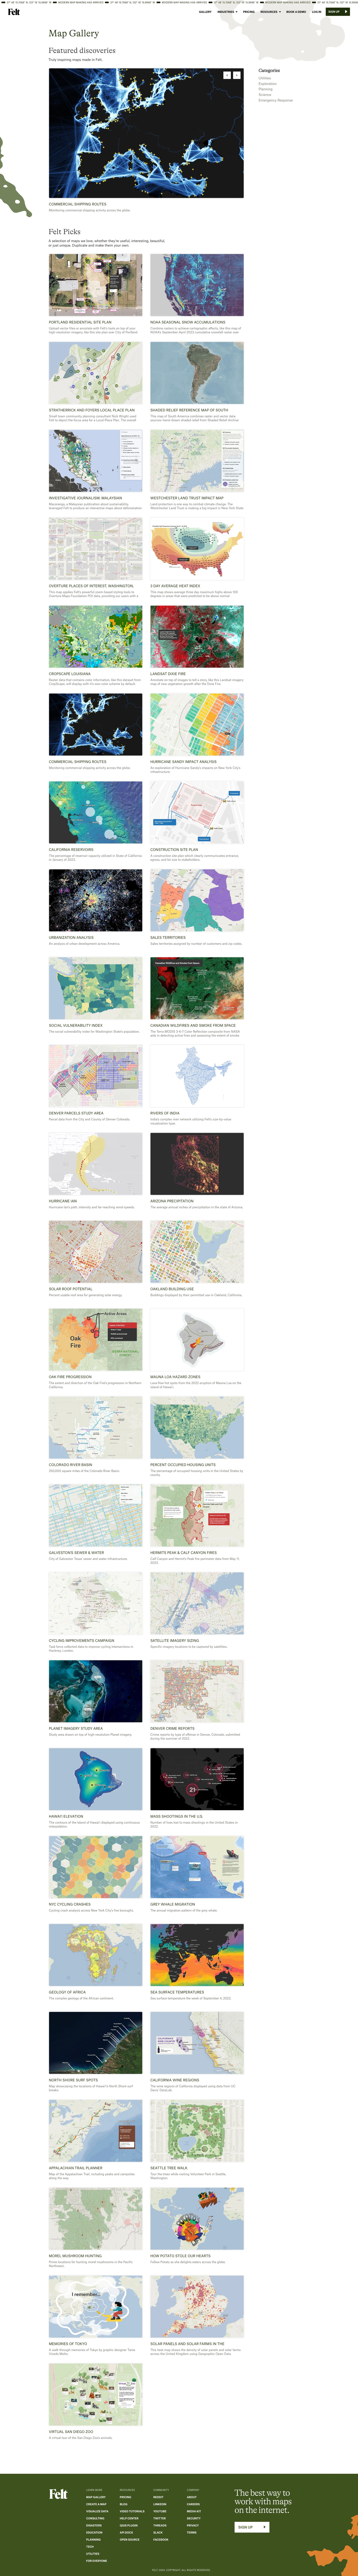 Felt Landing Page Example: The best way to work with maps on the internet. Felt lets you create maps collaboratively, using world-class data, and share them in a single click. For team projects or epic adventure with friends.